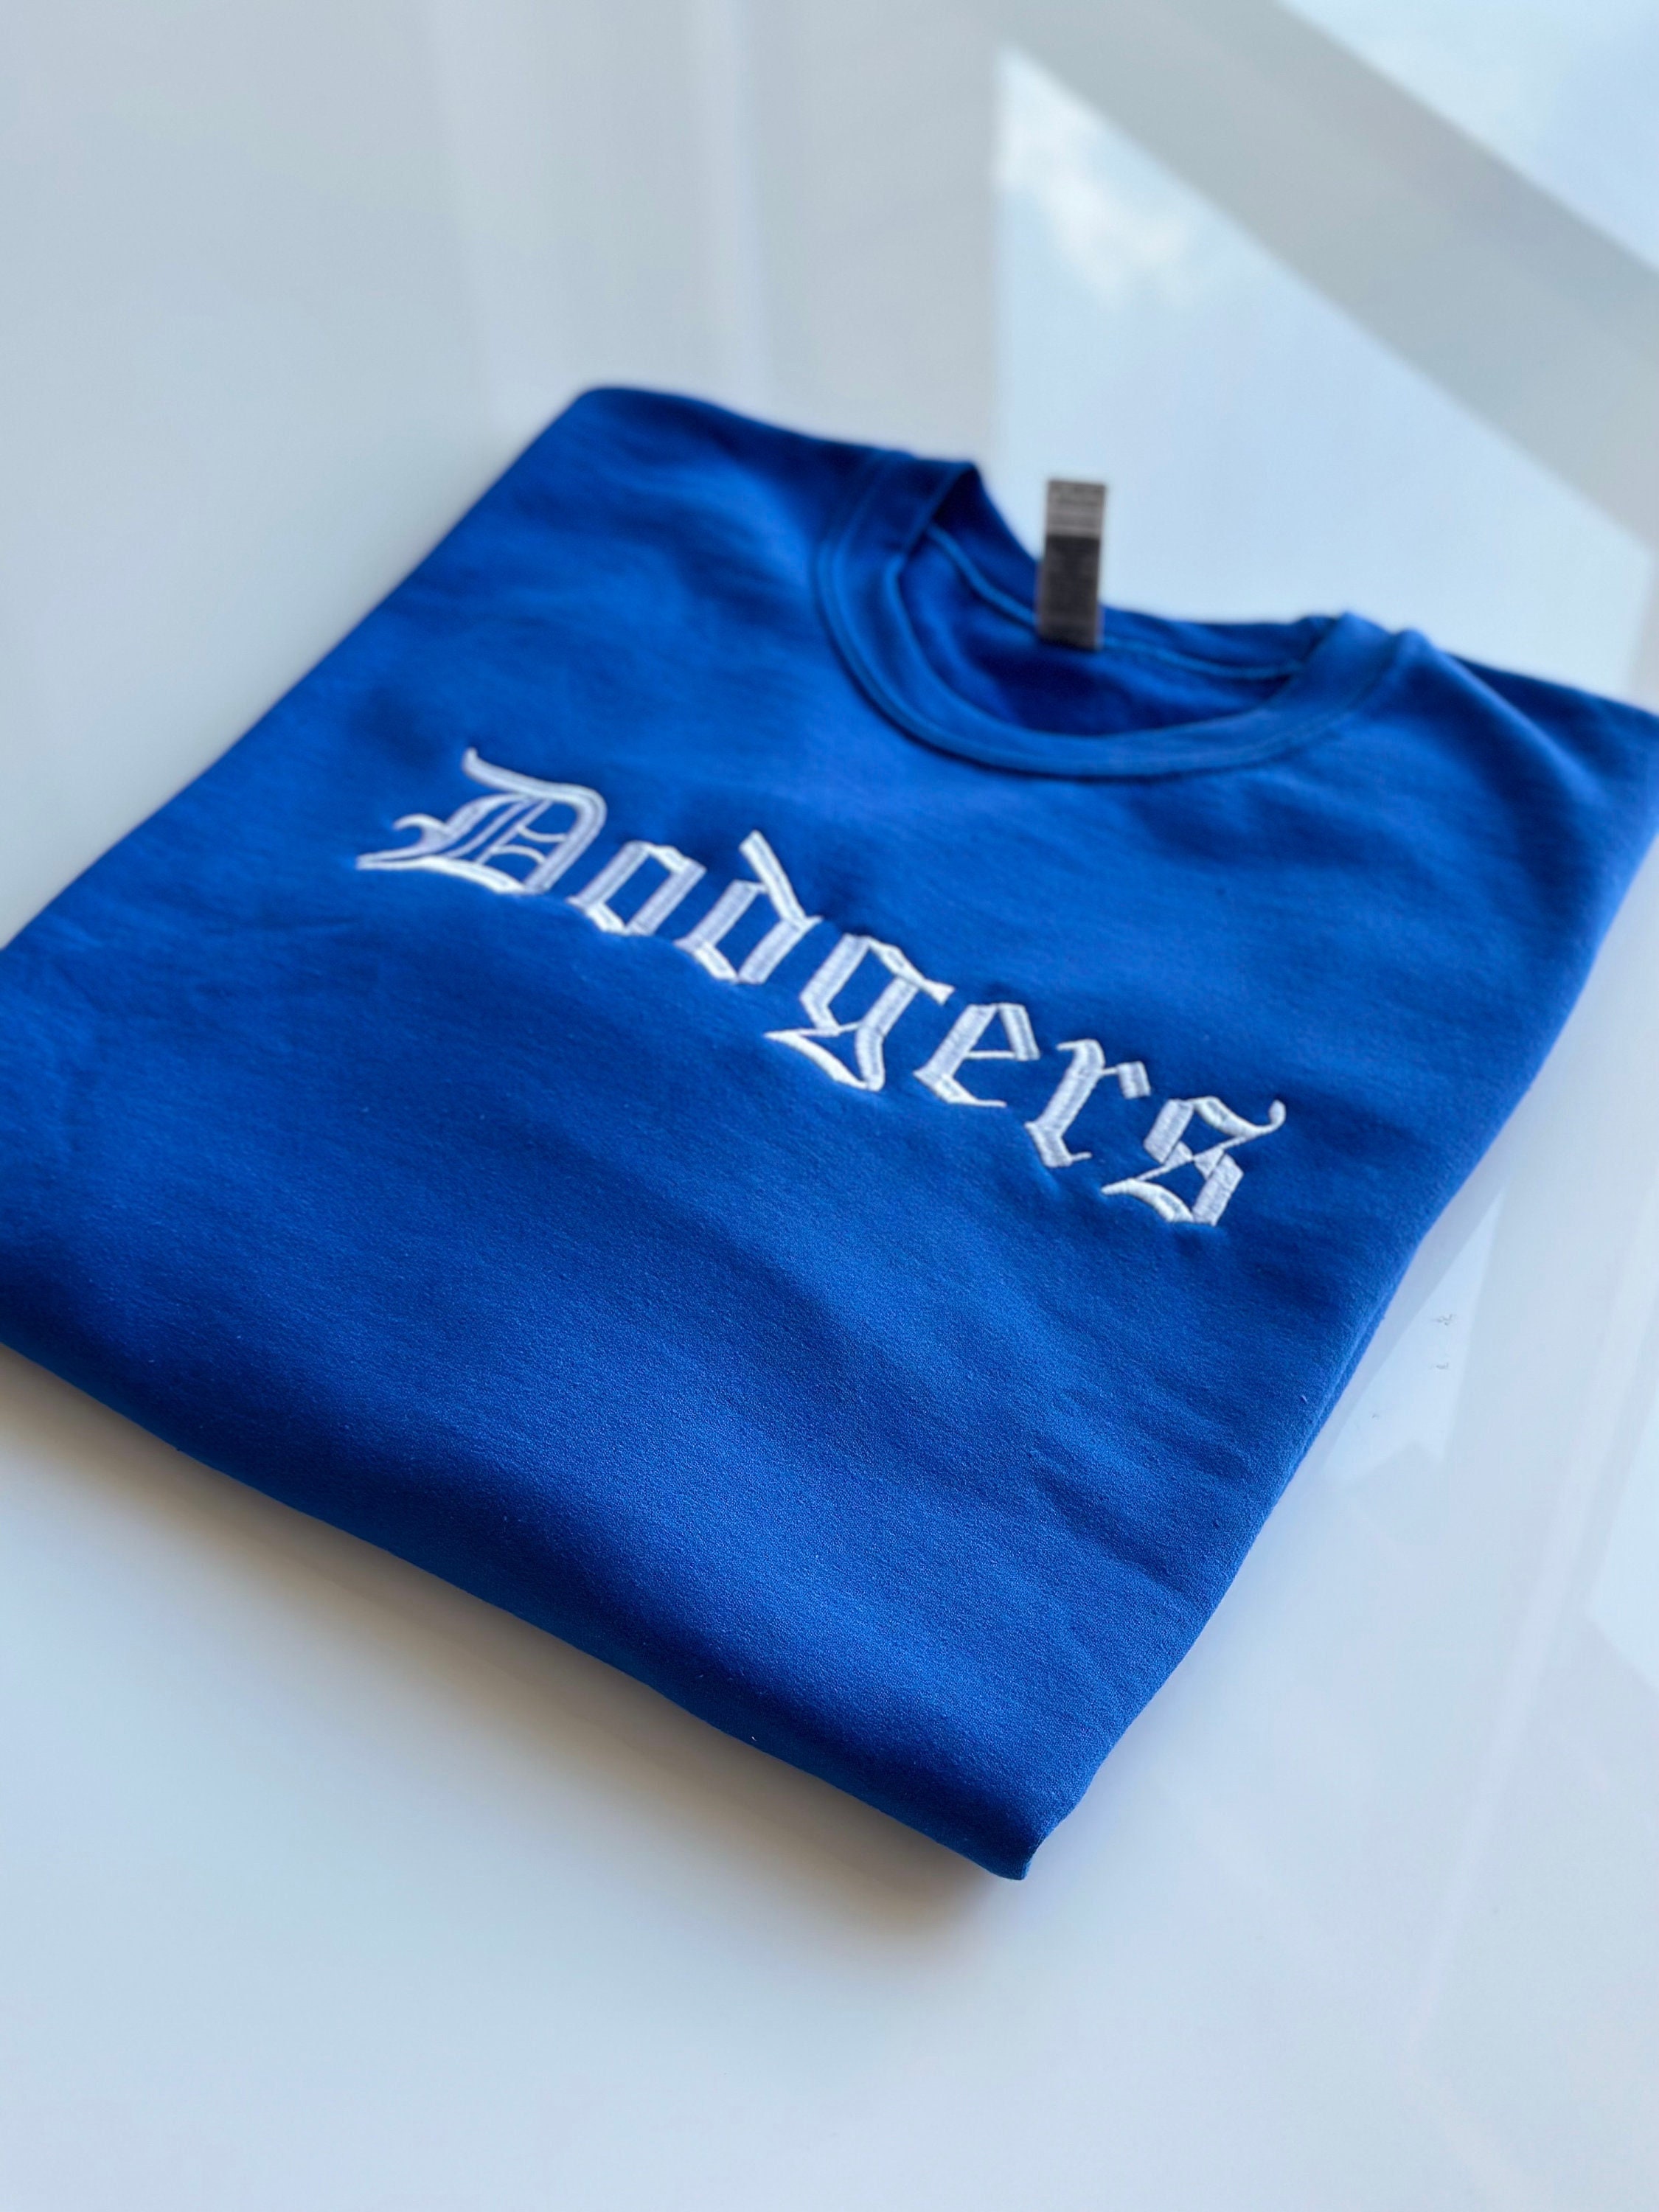 Los Angeles Dodgers T-Shirt from Homage. | Royal Blue | Vintage Apparel from Homage.